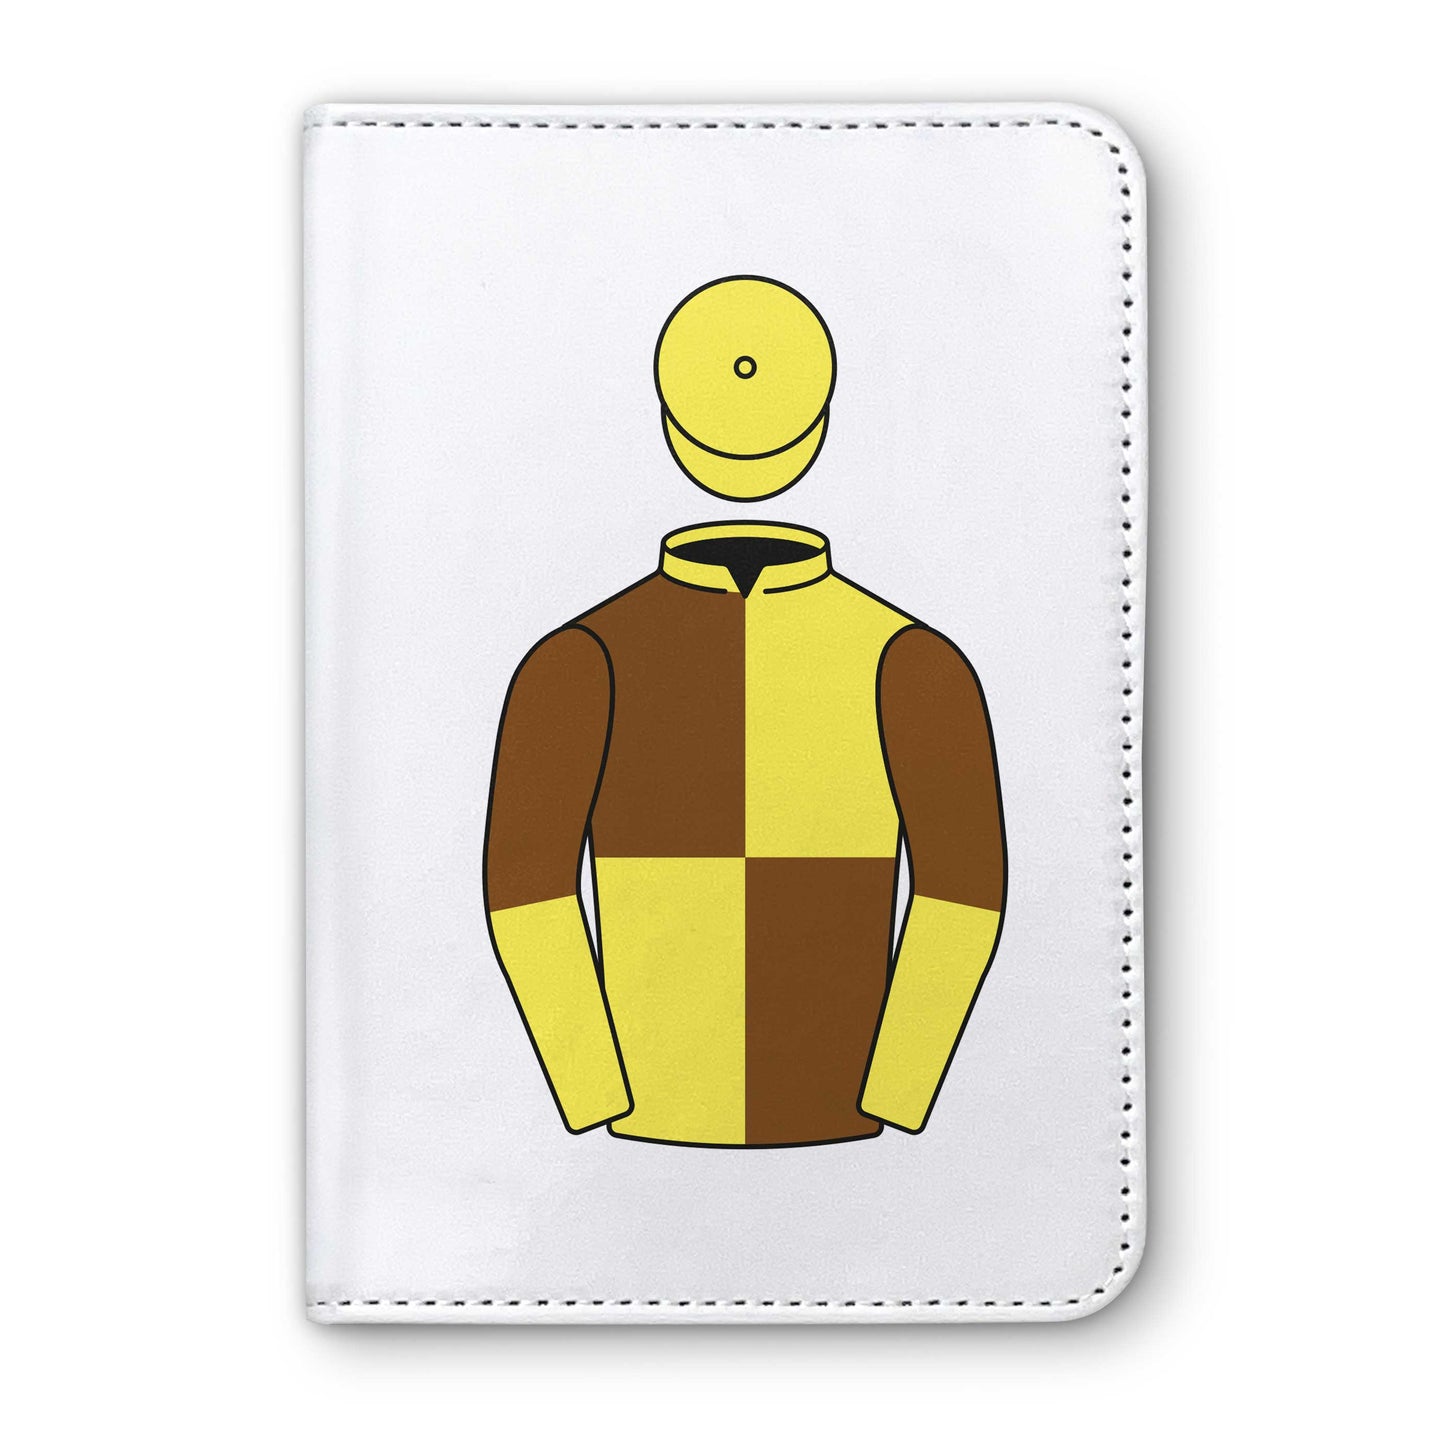 Mrs Audrey Turley Horse Racing Passport Holder - Hacked Up Horse Racing Gifts